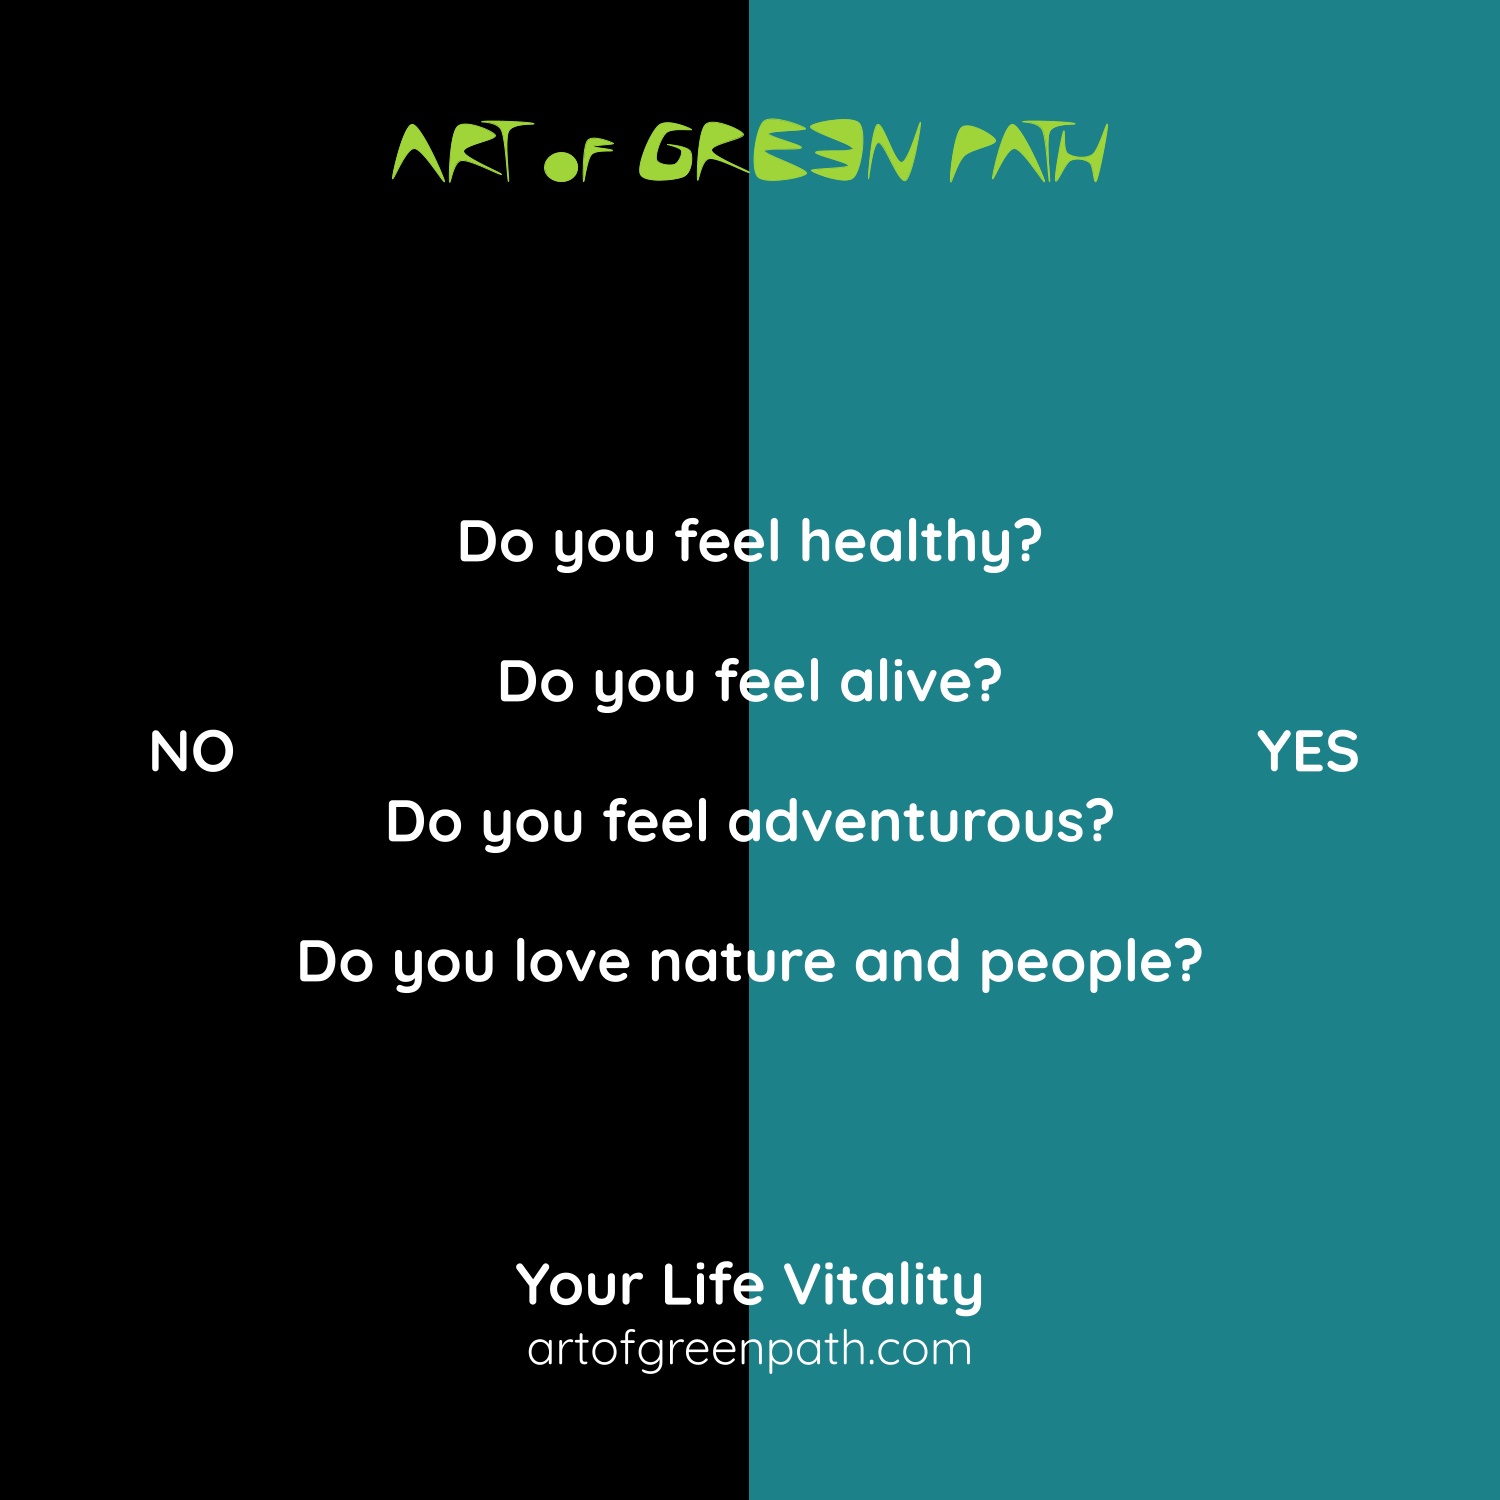 Art Of Green Path - Your Life Vitality in 4 Questions